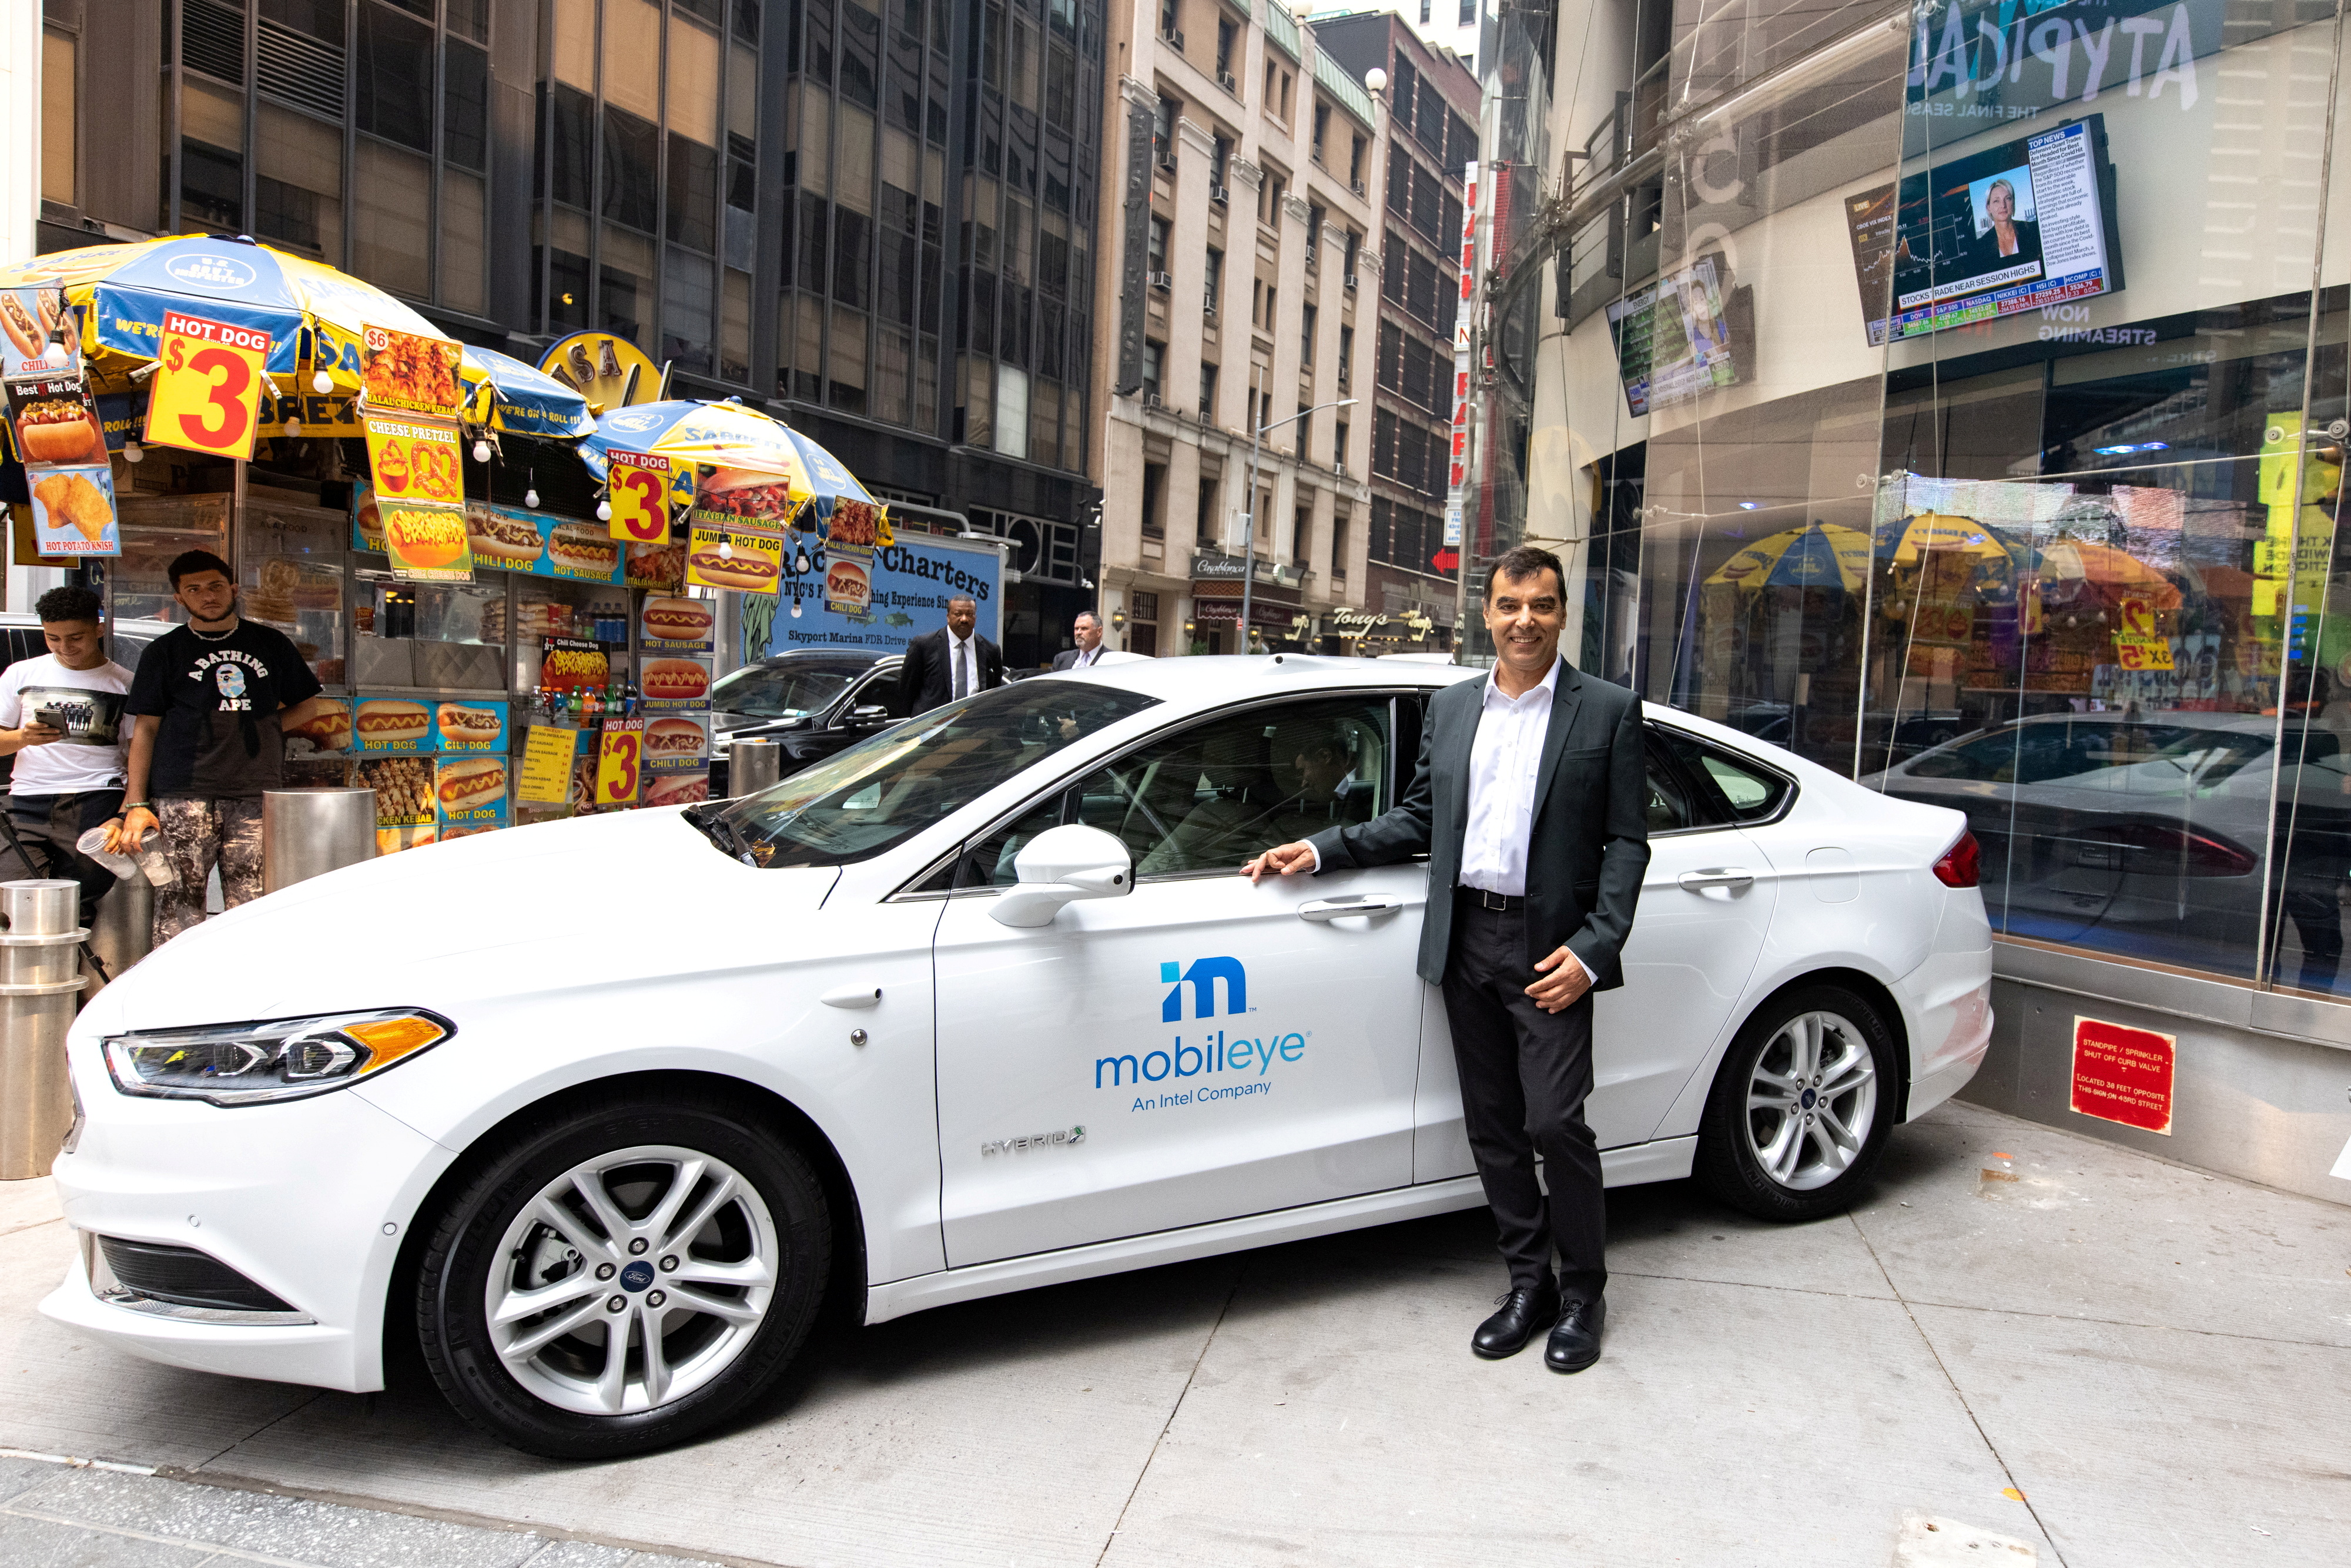 Mobileye’s CEO Amnon Shashua poses with a Mobileye driverless vehicle at the Nasdaq Market site in New York, U.S., July 20, 2021. REUTERS/Jeenah Moon/File Photo